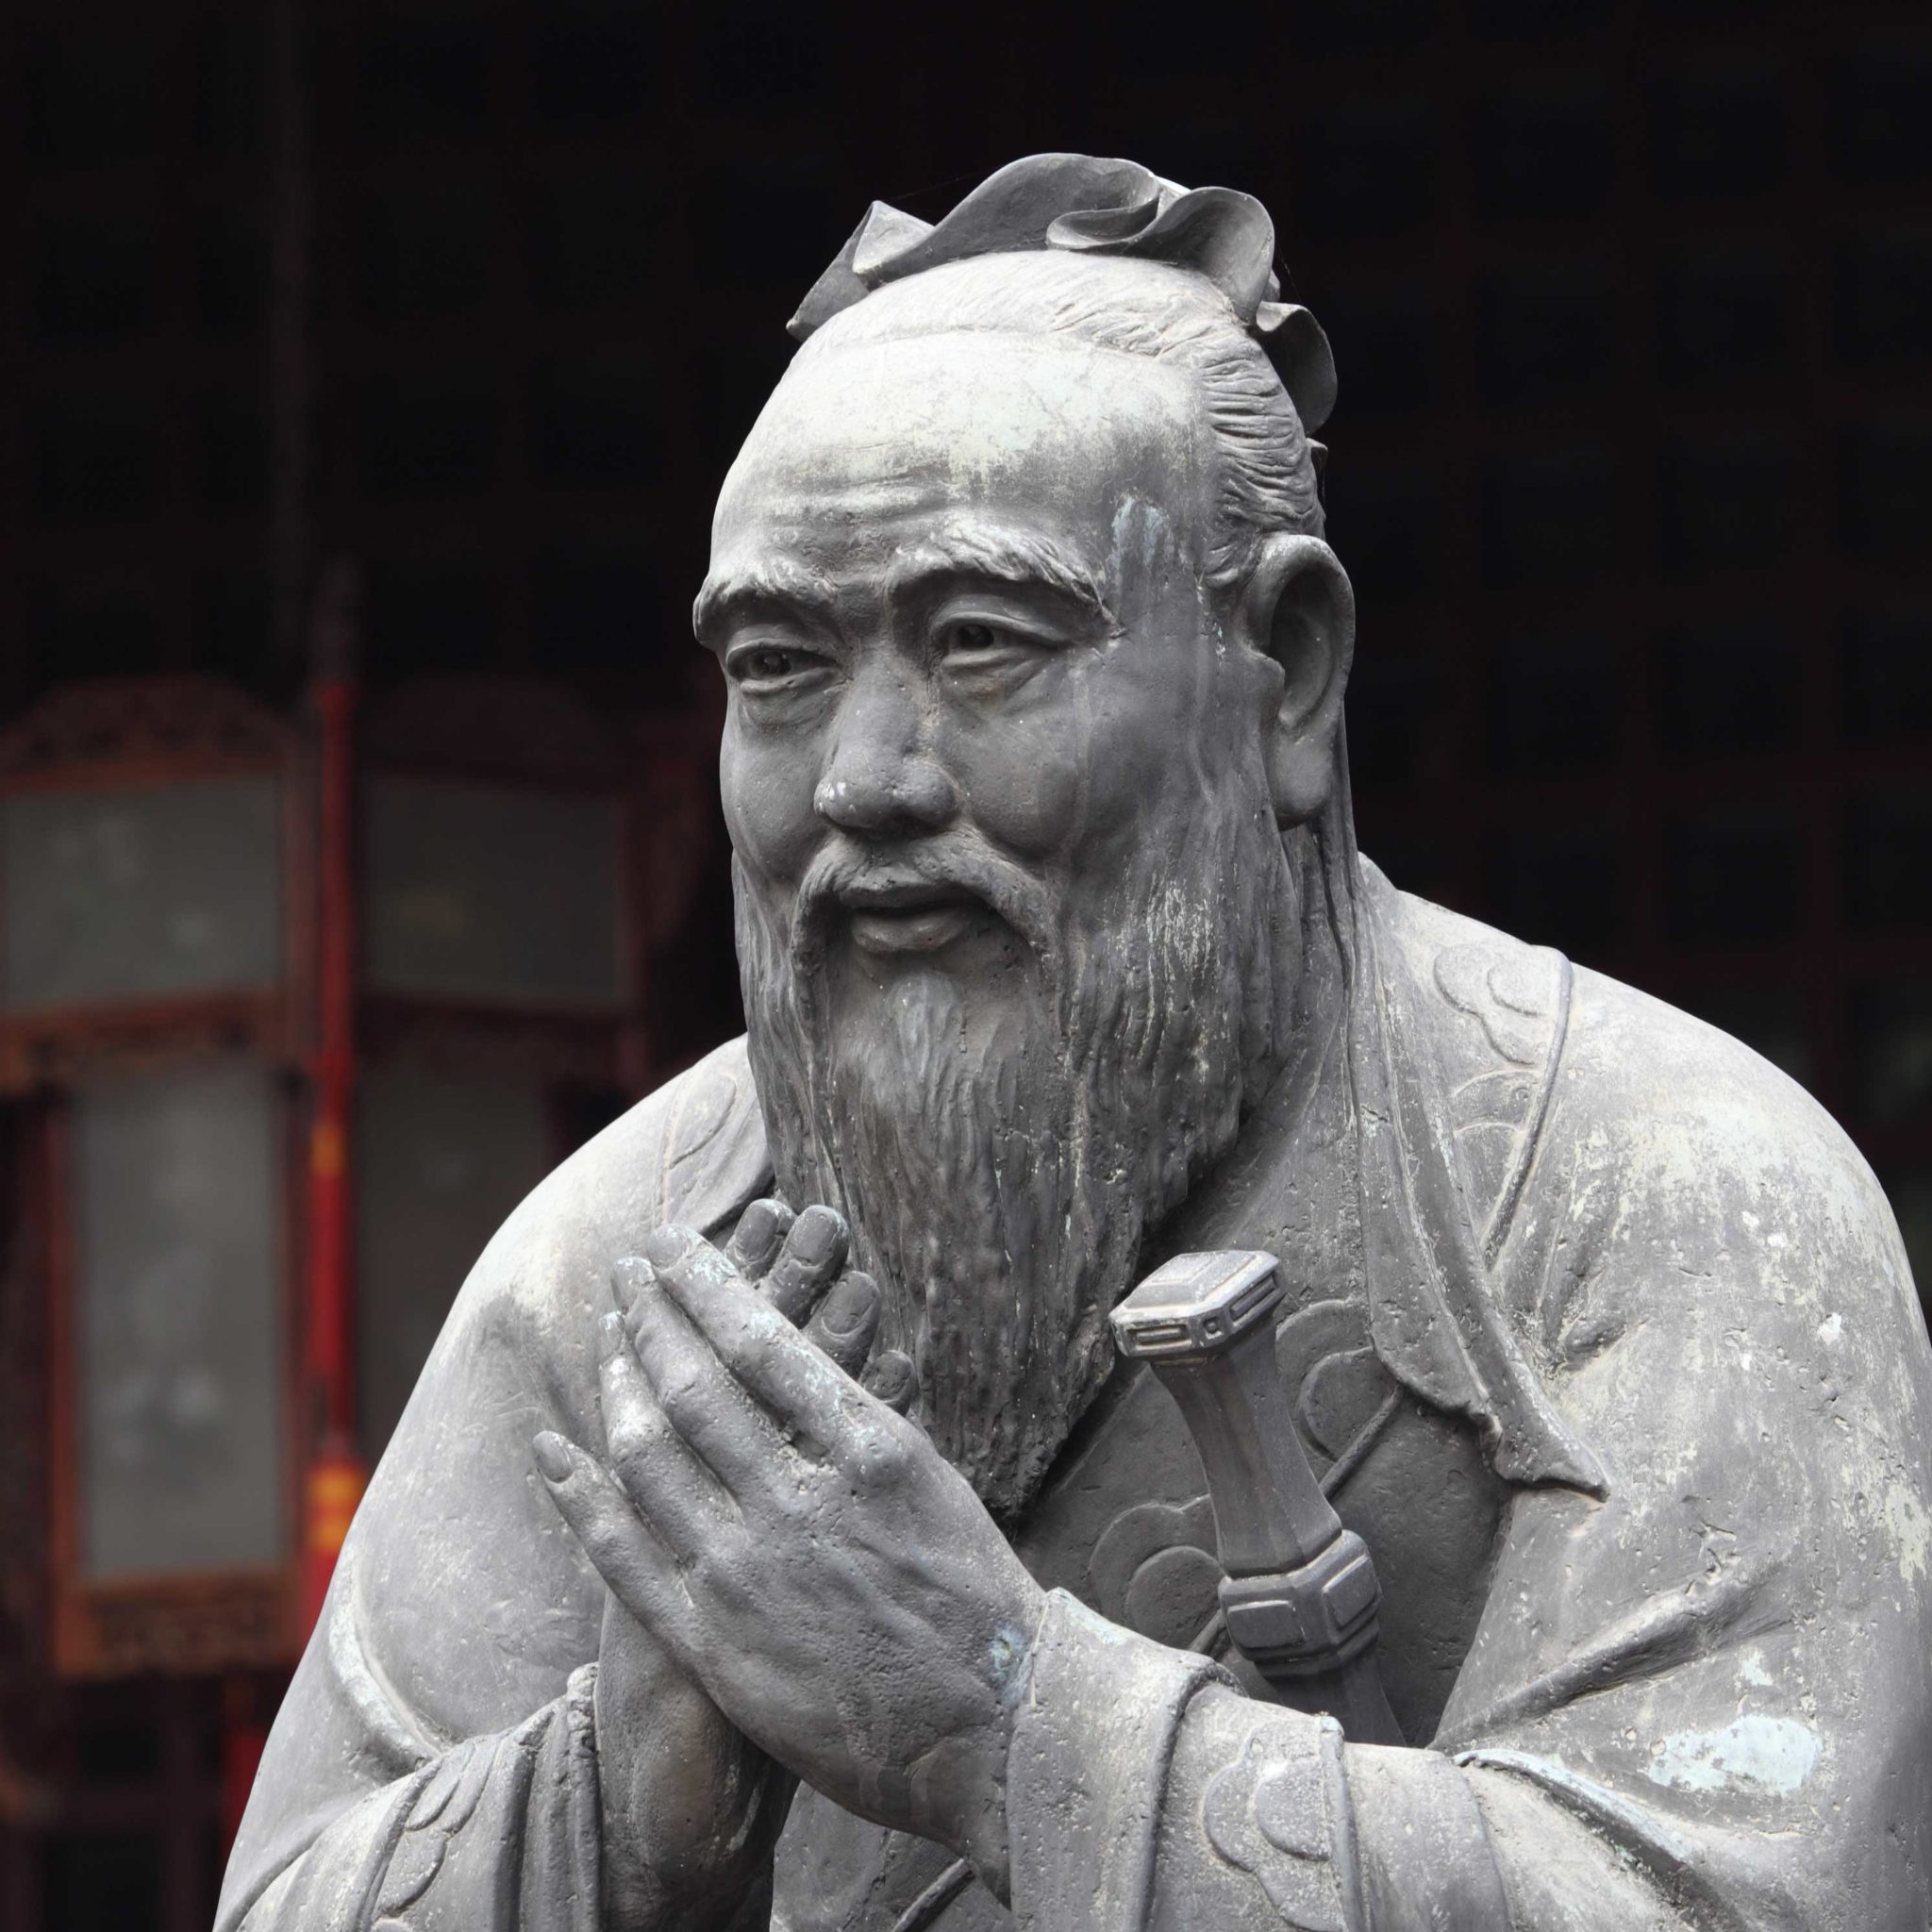 Some Thoughts on Individualism, Relationality, Confucian Ethics, and Dewey’s Idea of Democracy